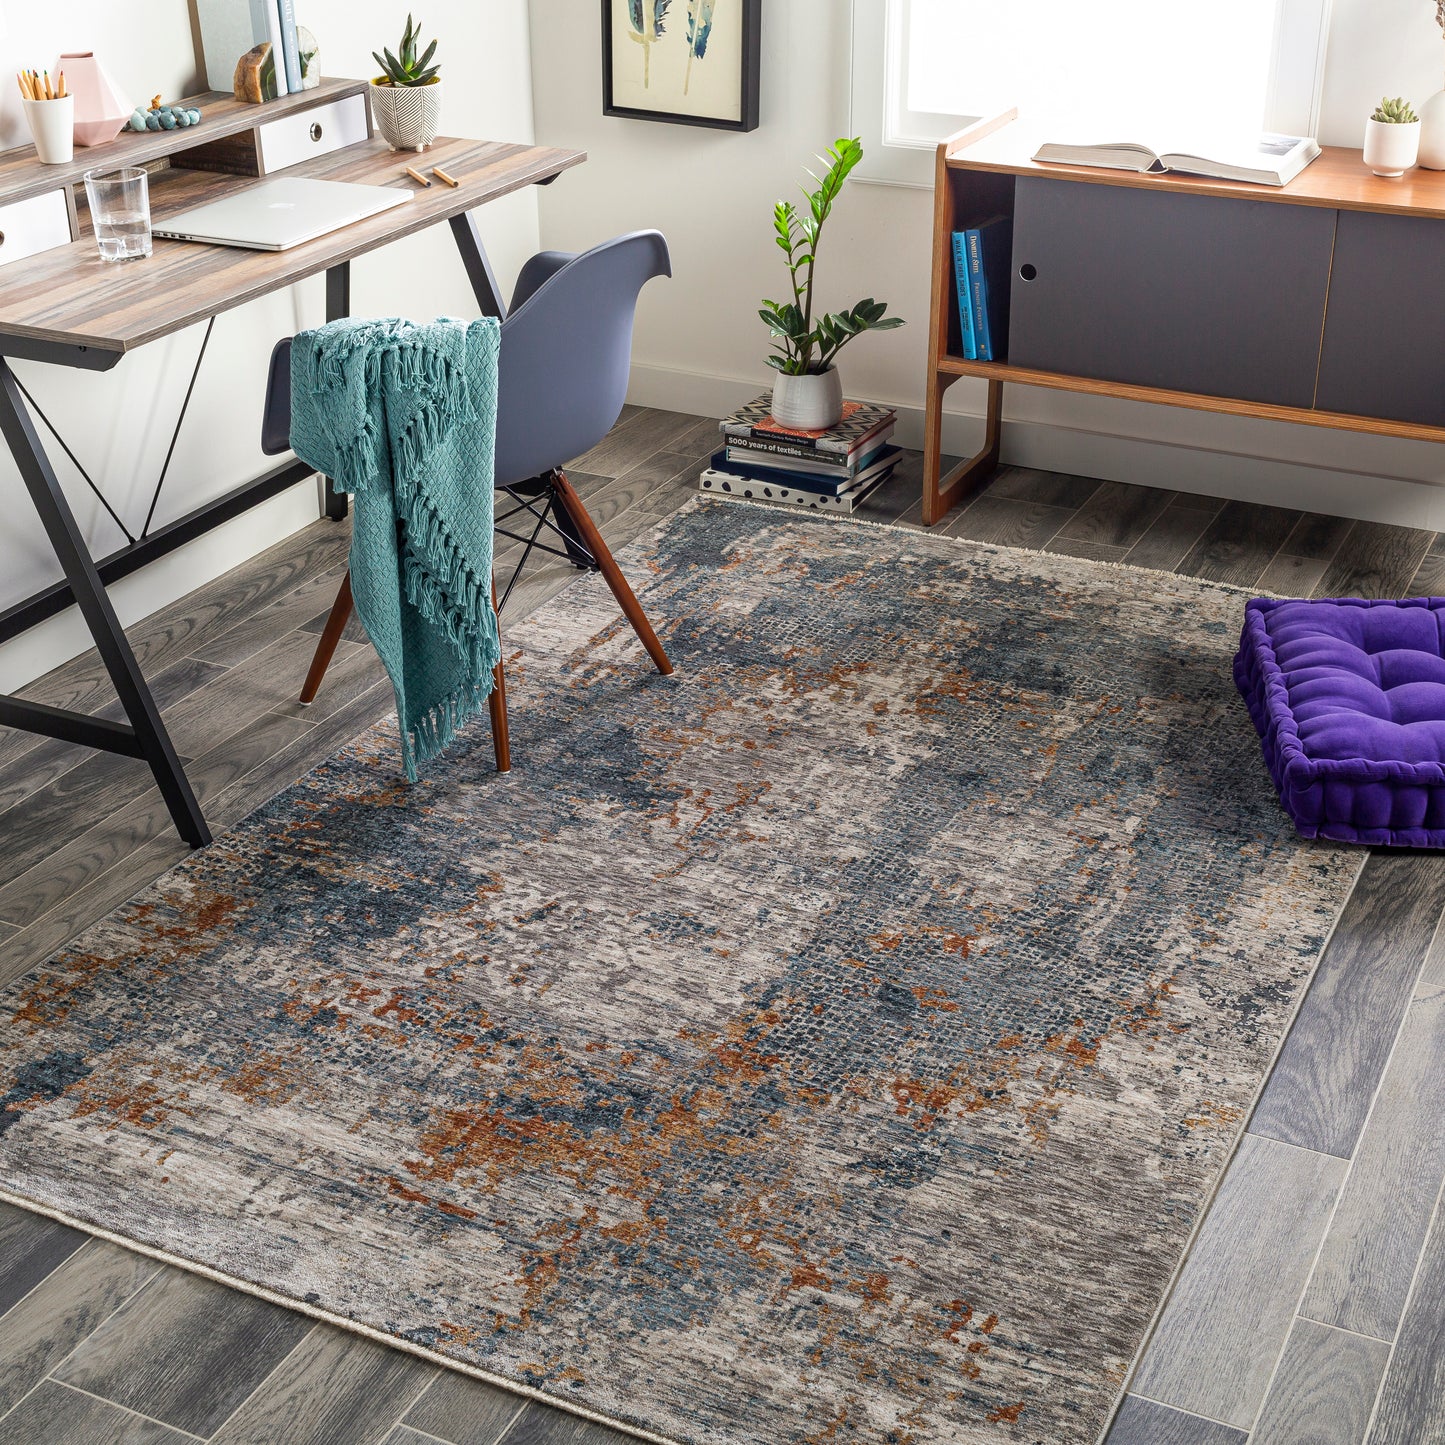 Cardiff 29058 Machine Woven Synthetic Blend Indoor Area Rug by Surya Rugs